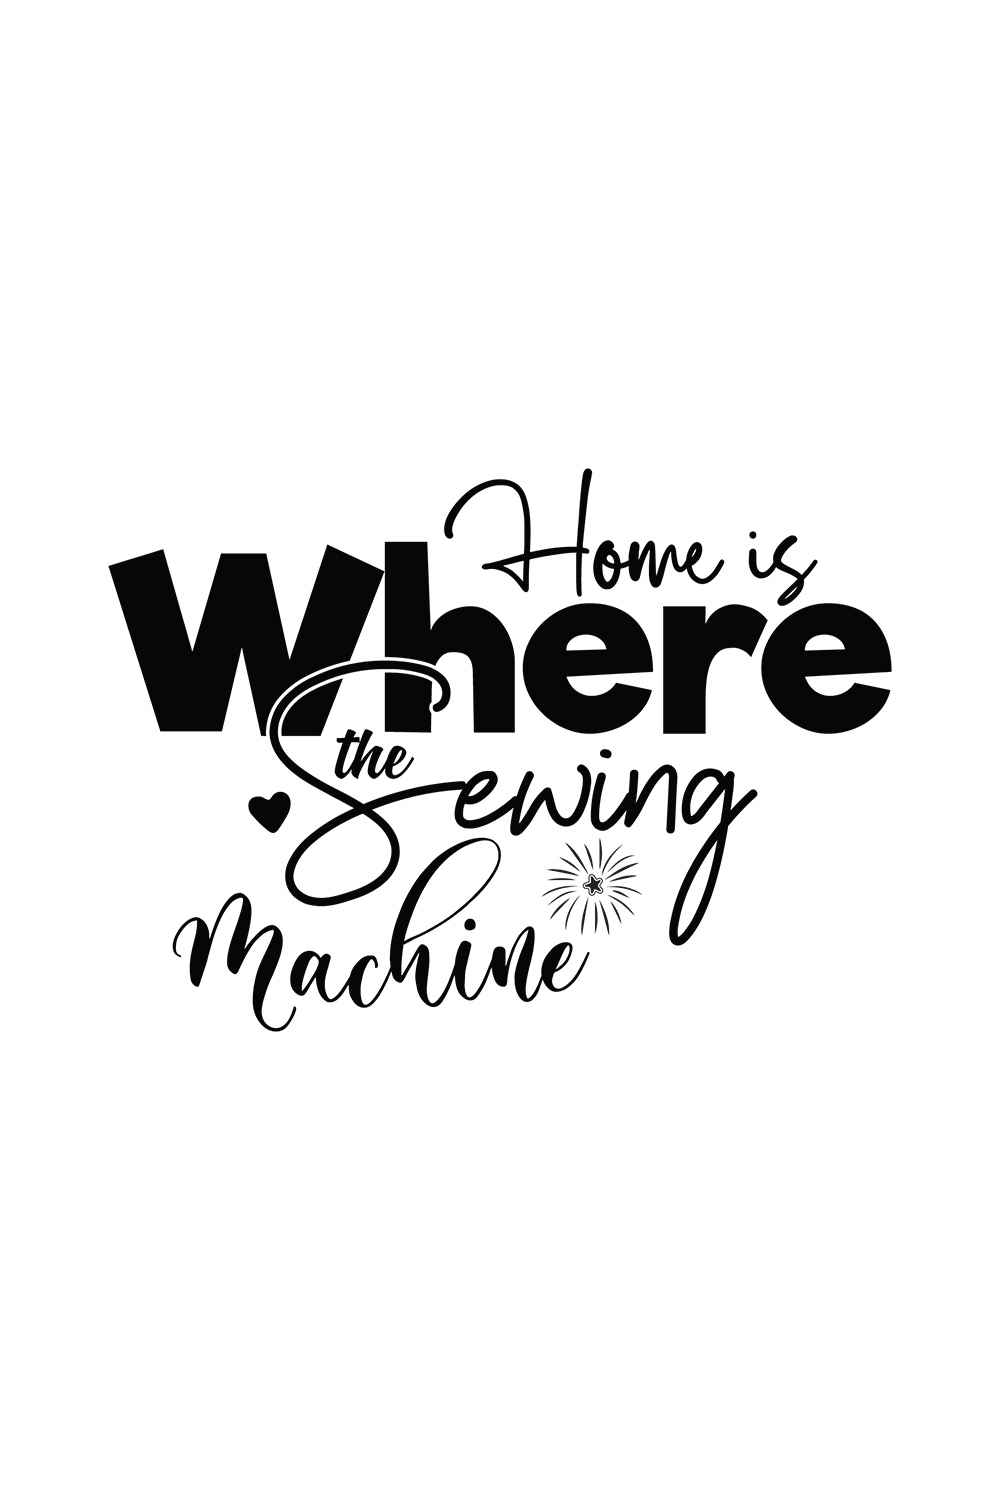 Home is Where the Sewing Machine SVG pinterest image.